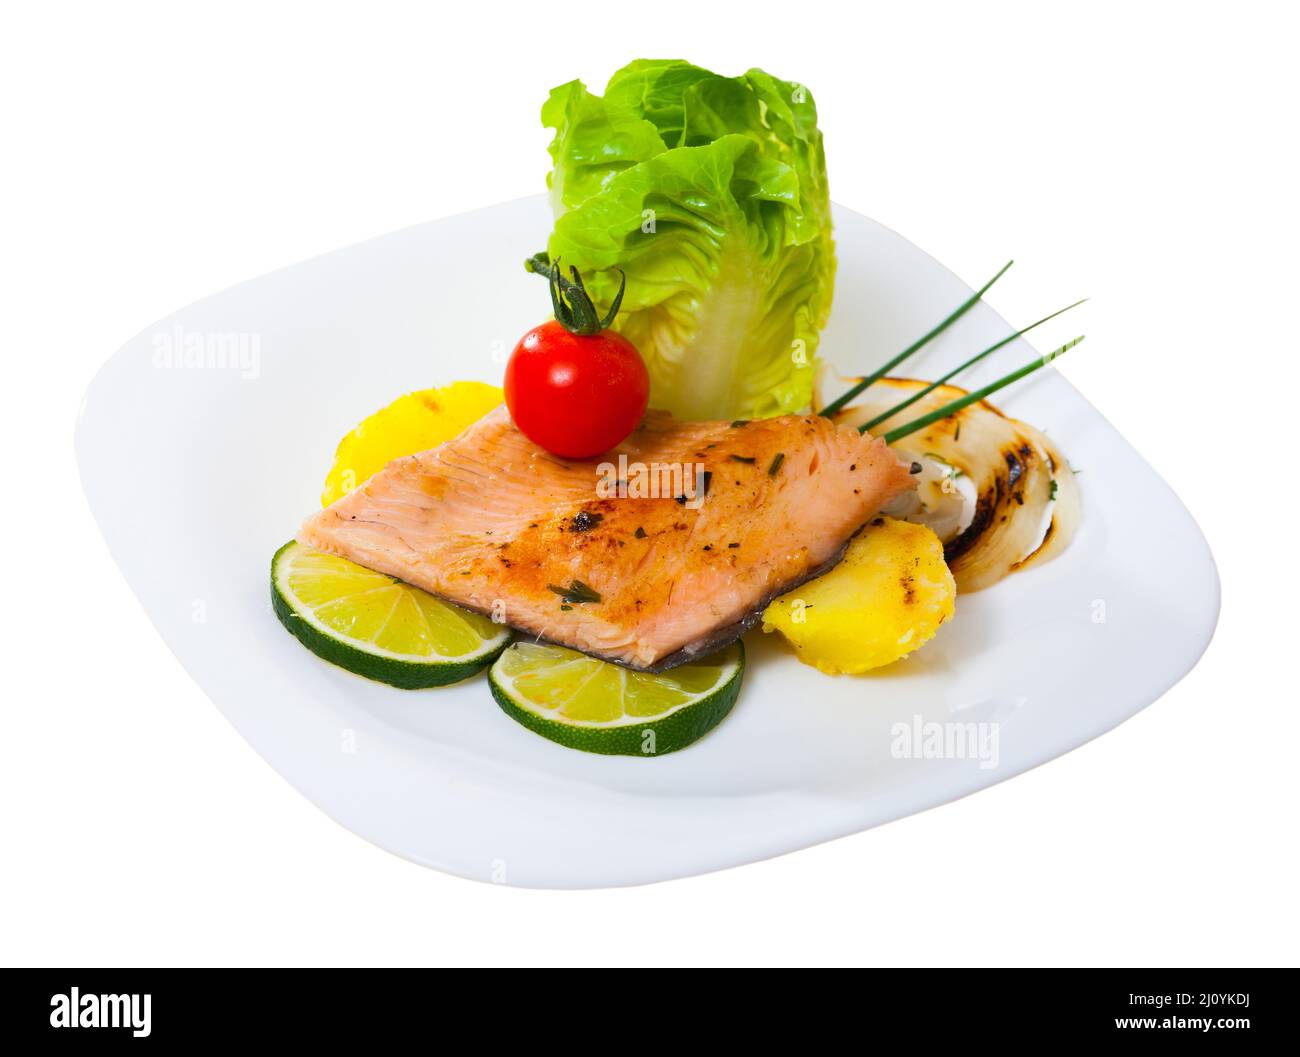 Baked trout fillet with potatoes on white plate Stock Photo